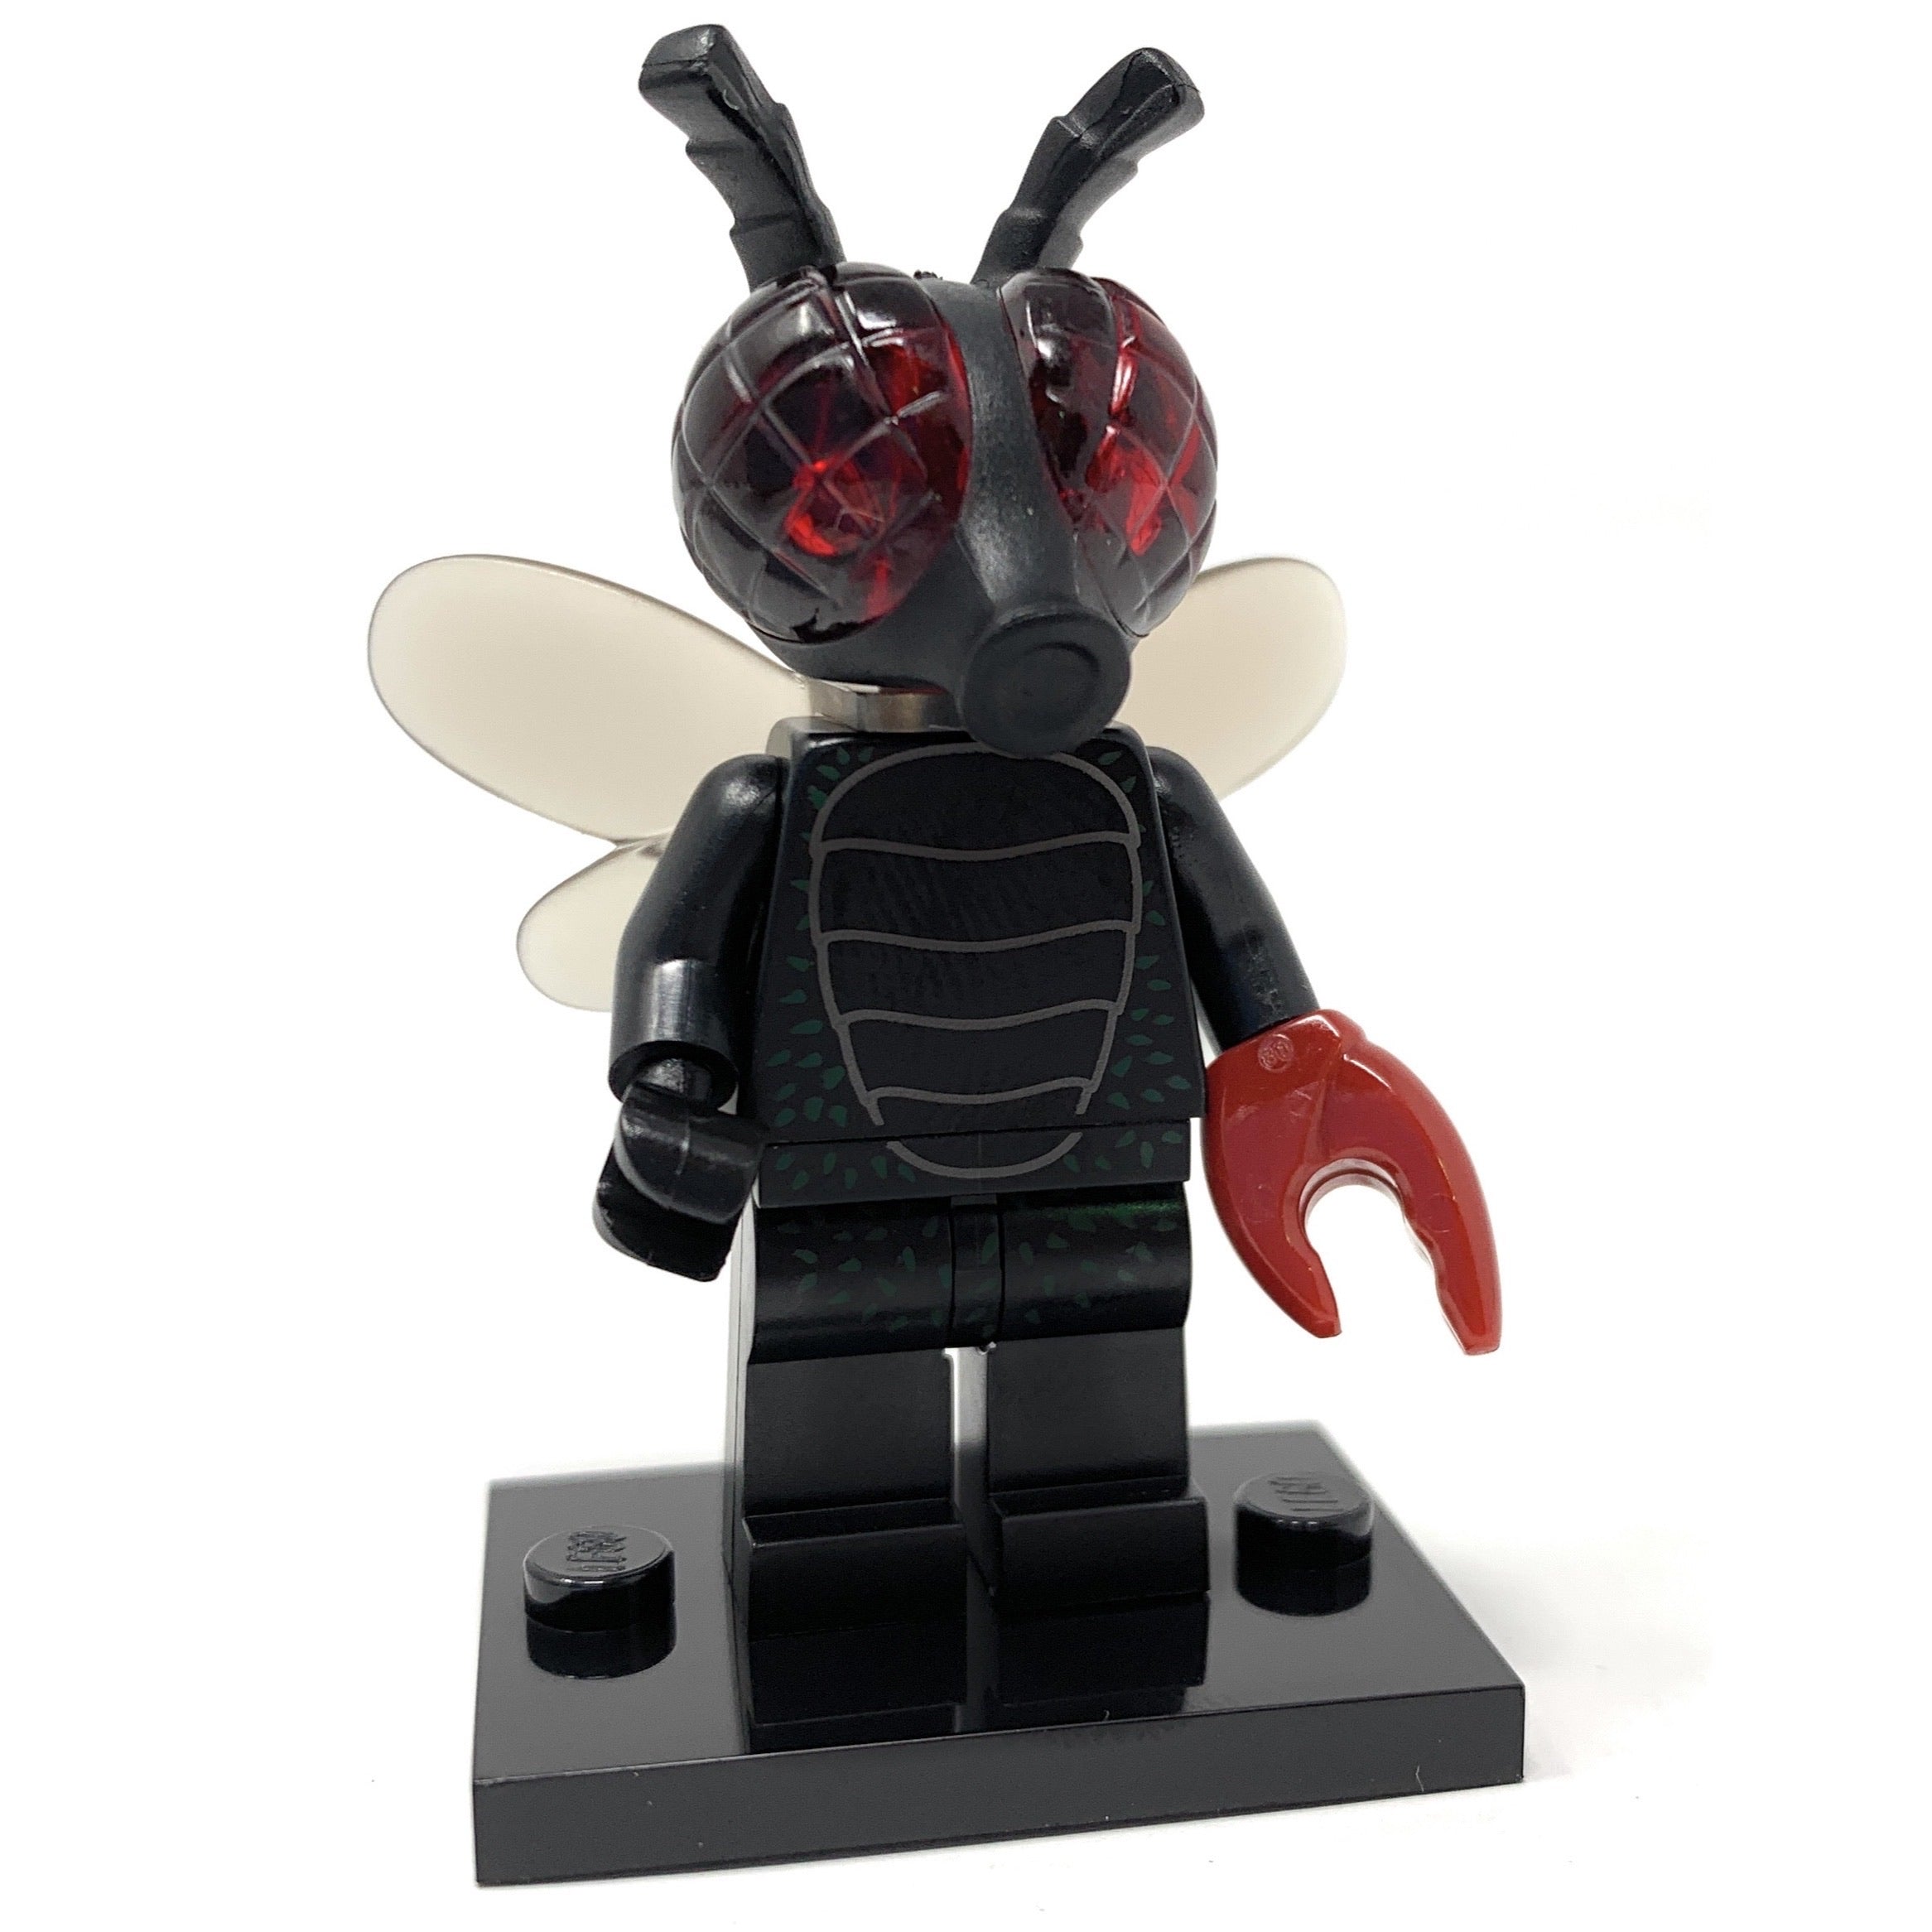 Fly Monster - LEGO Series Minifigure – The Brick Shop